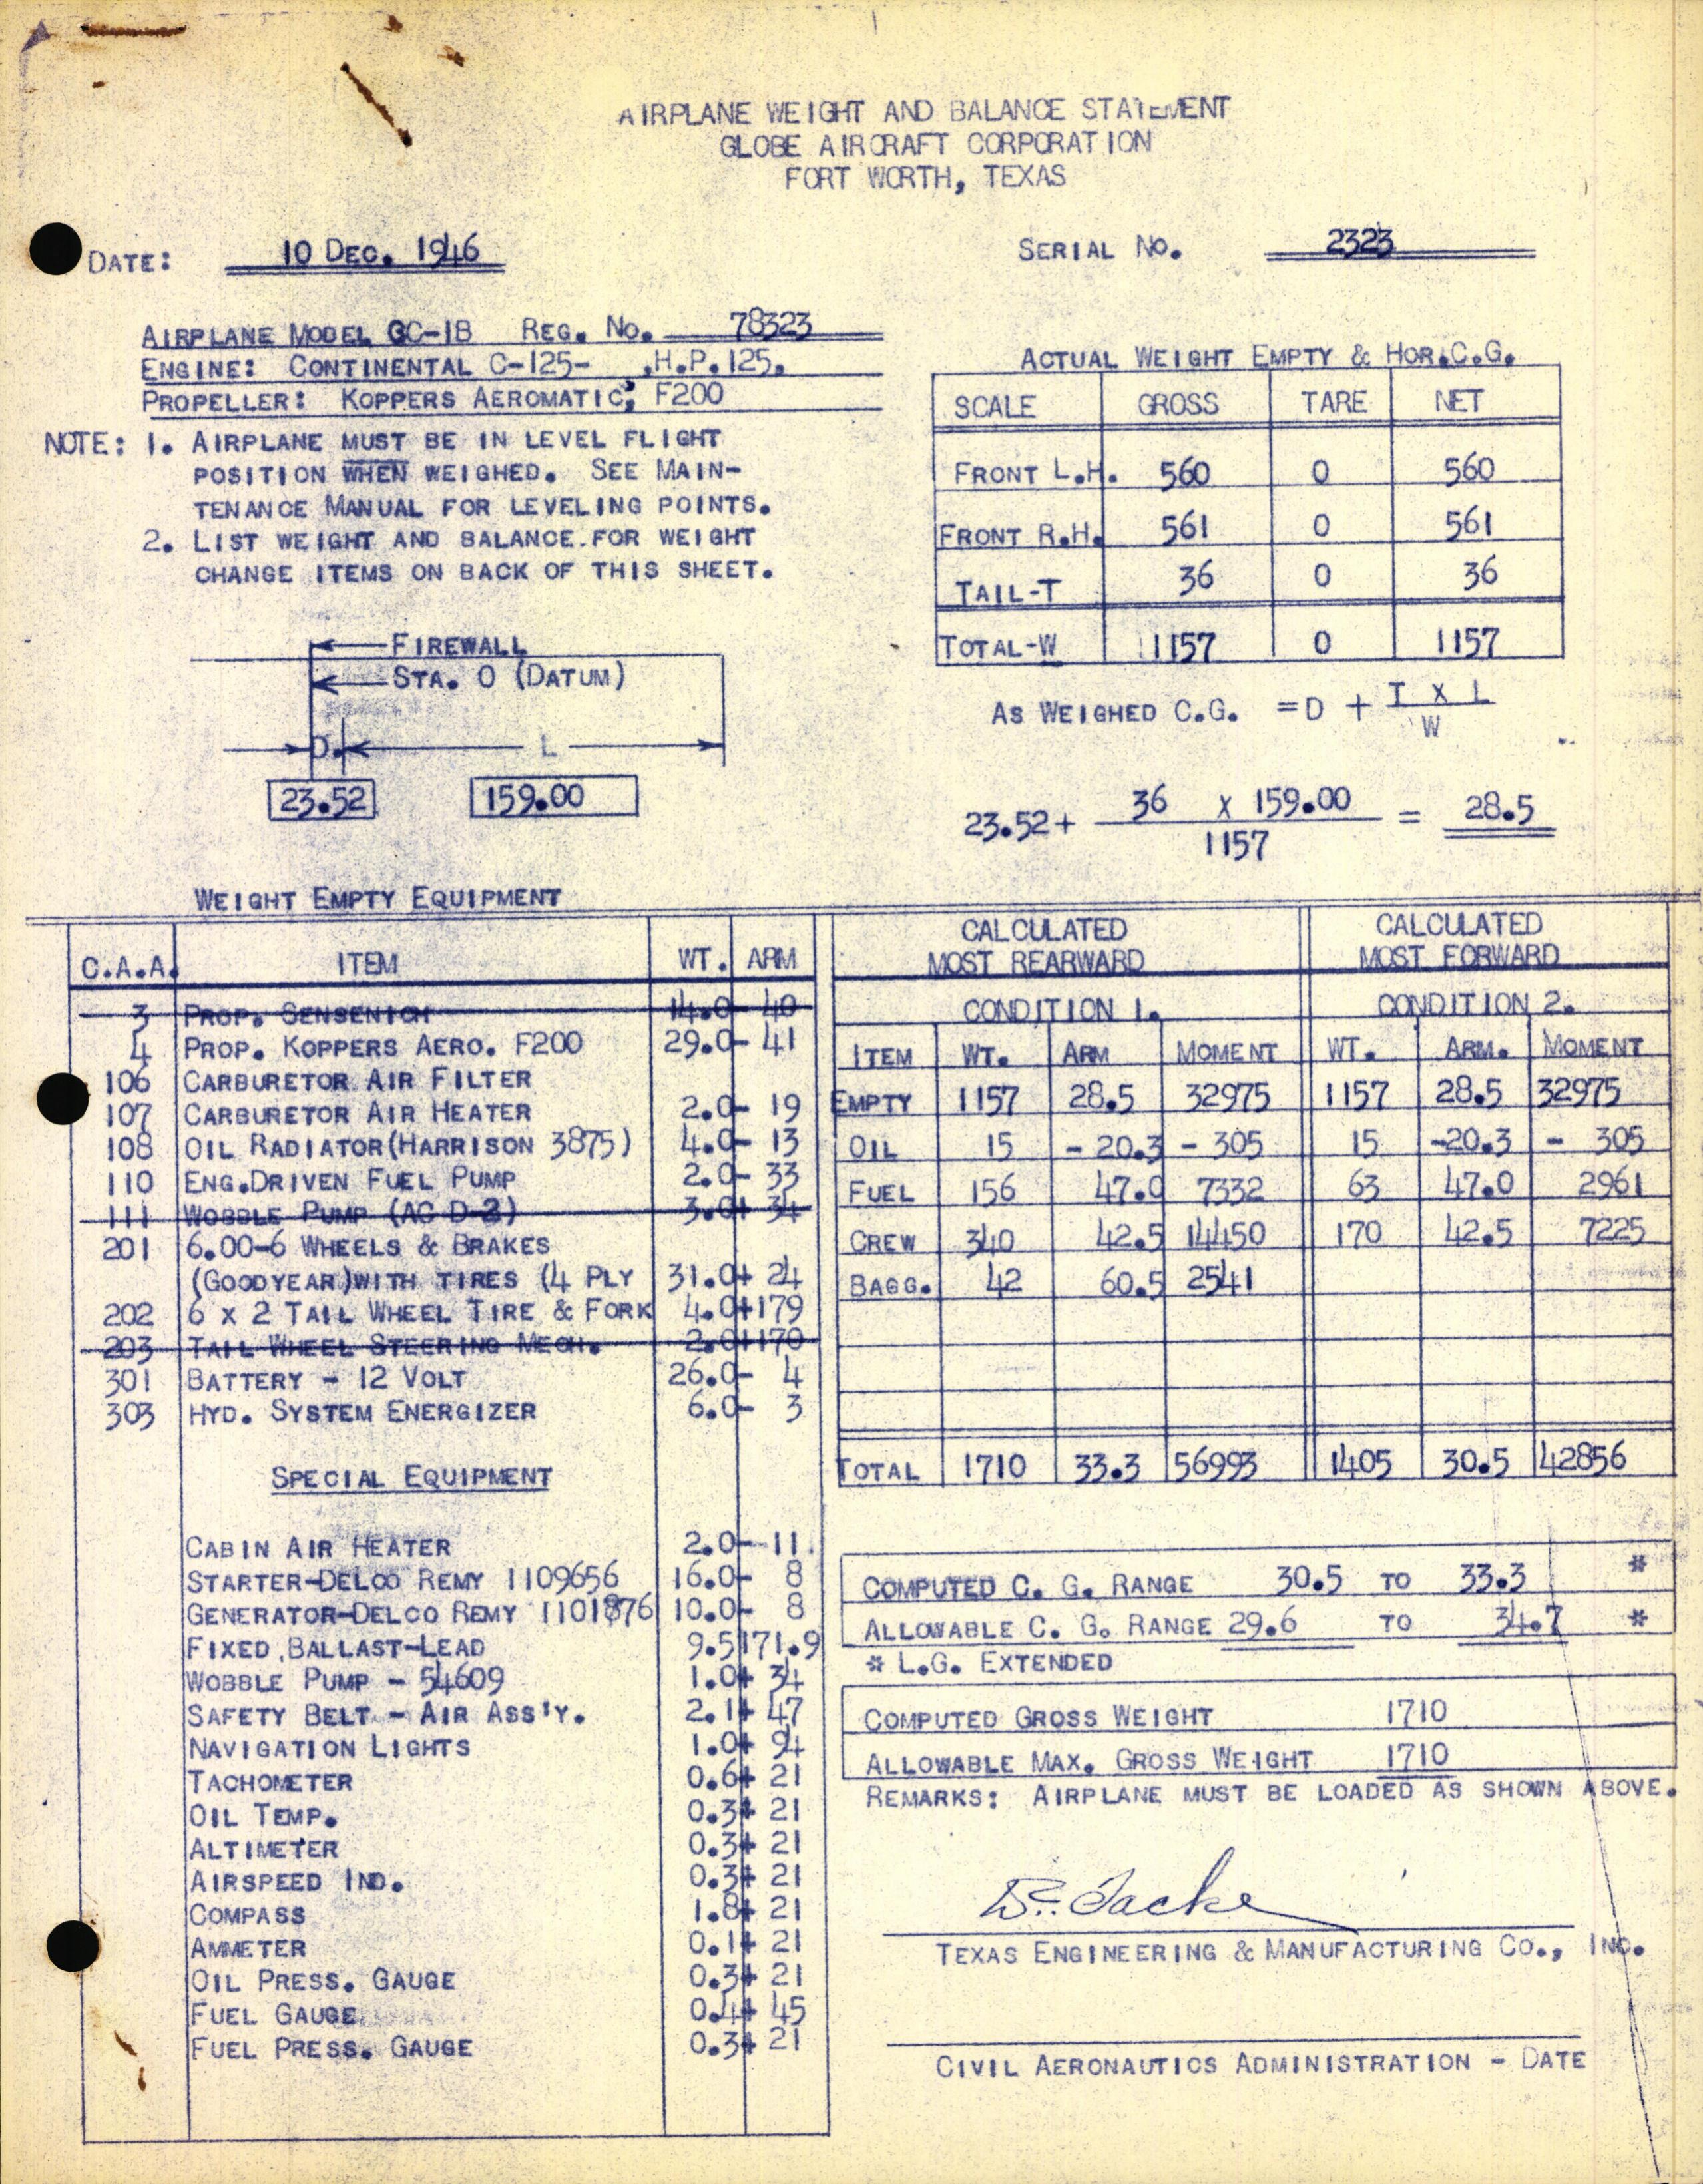 Sample page 1 from AirCorps Library document: Technical Information for Serial Number 2323